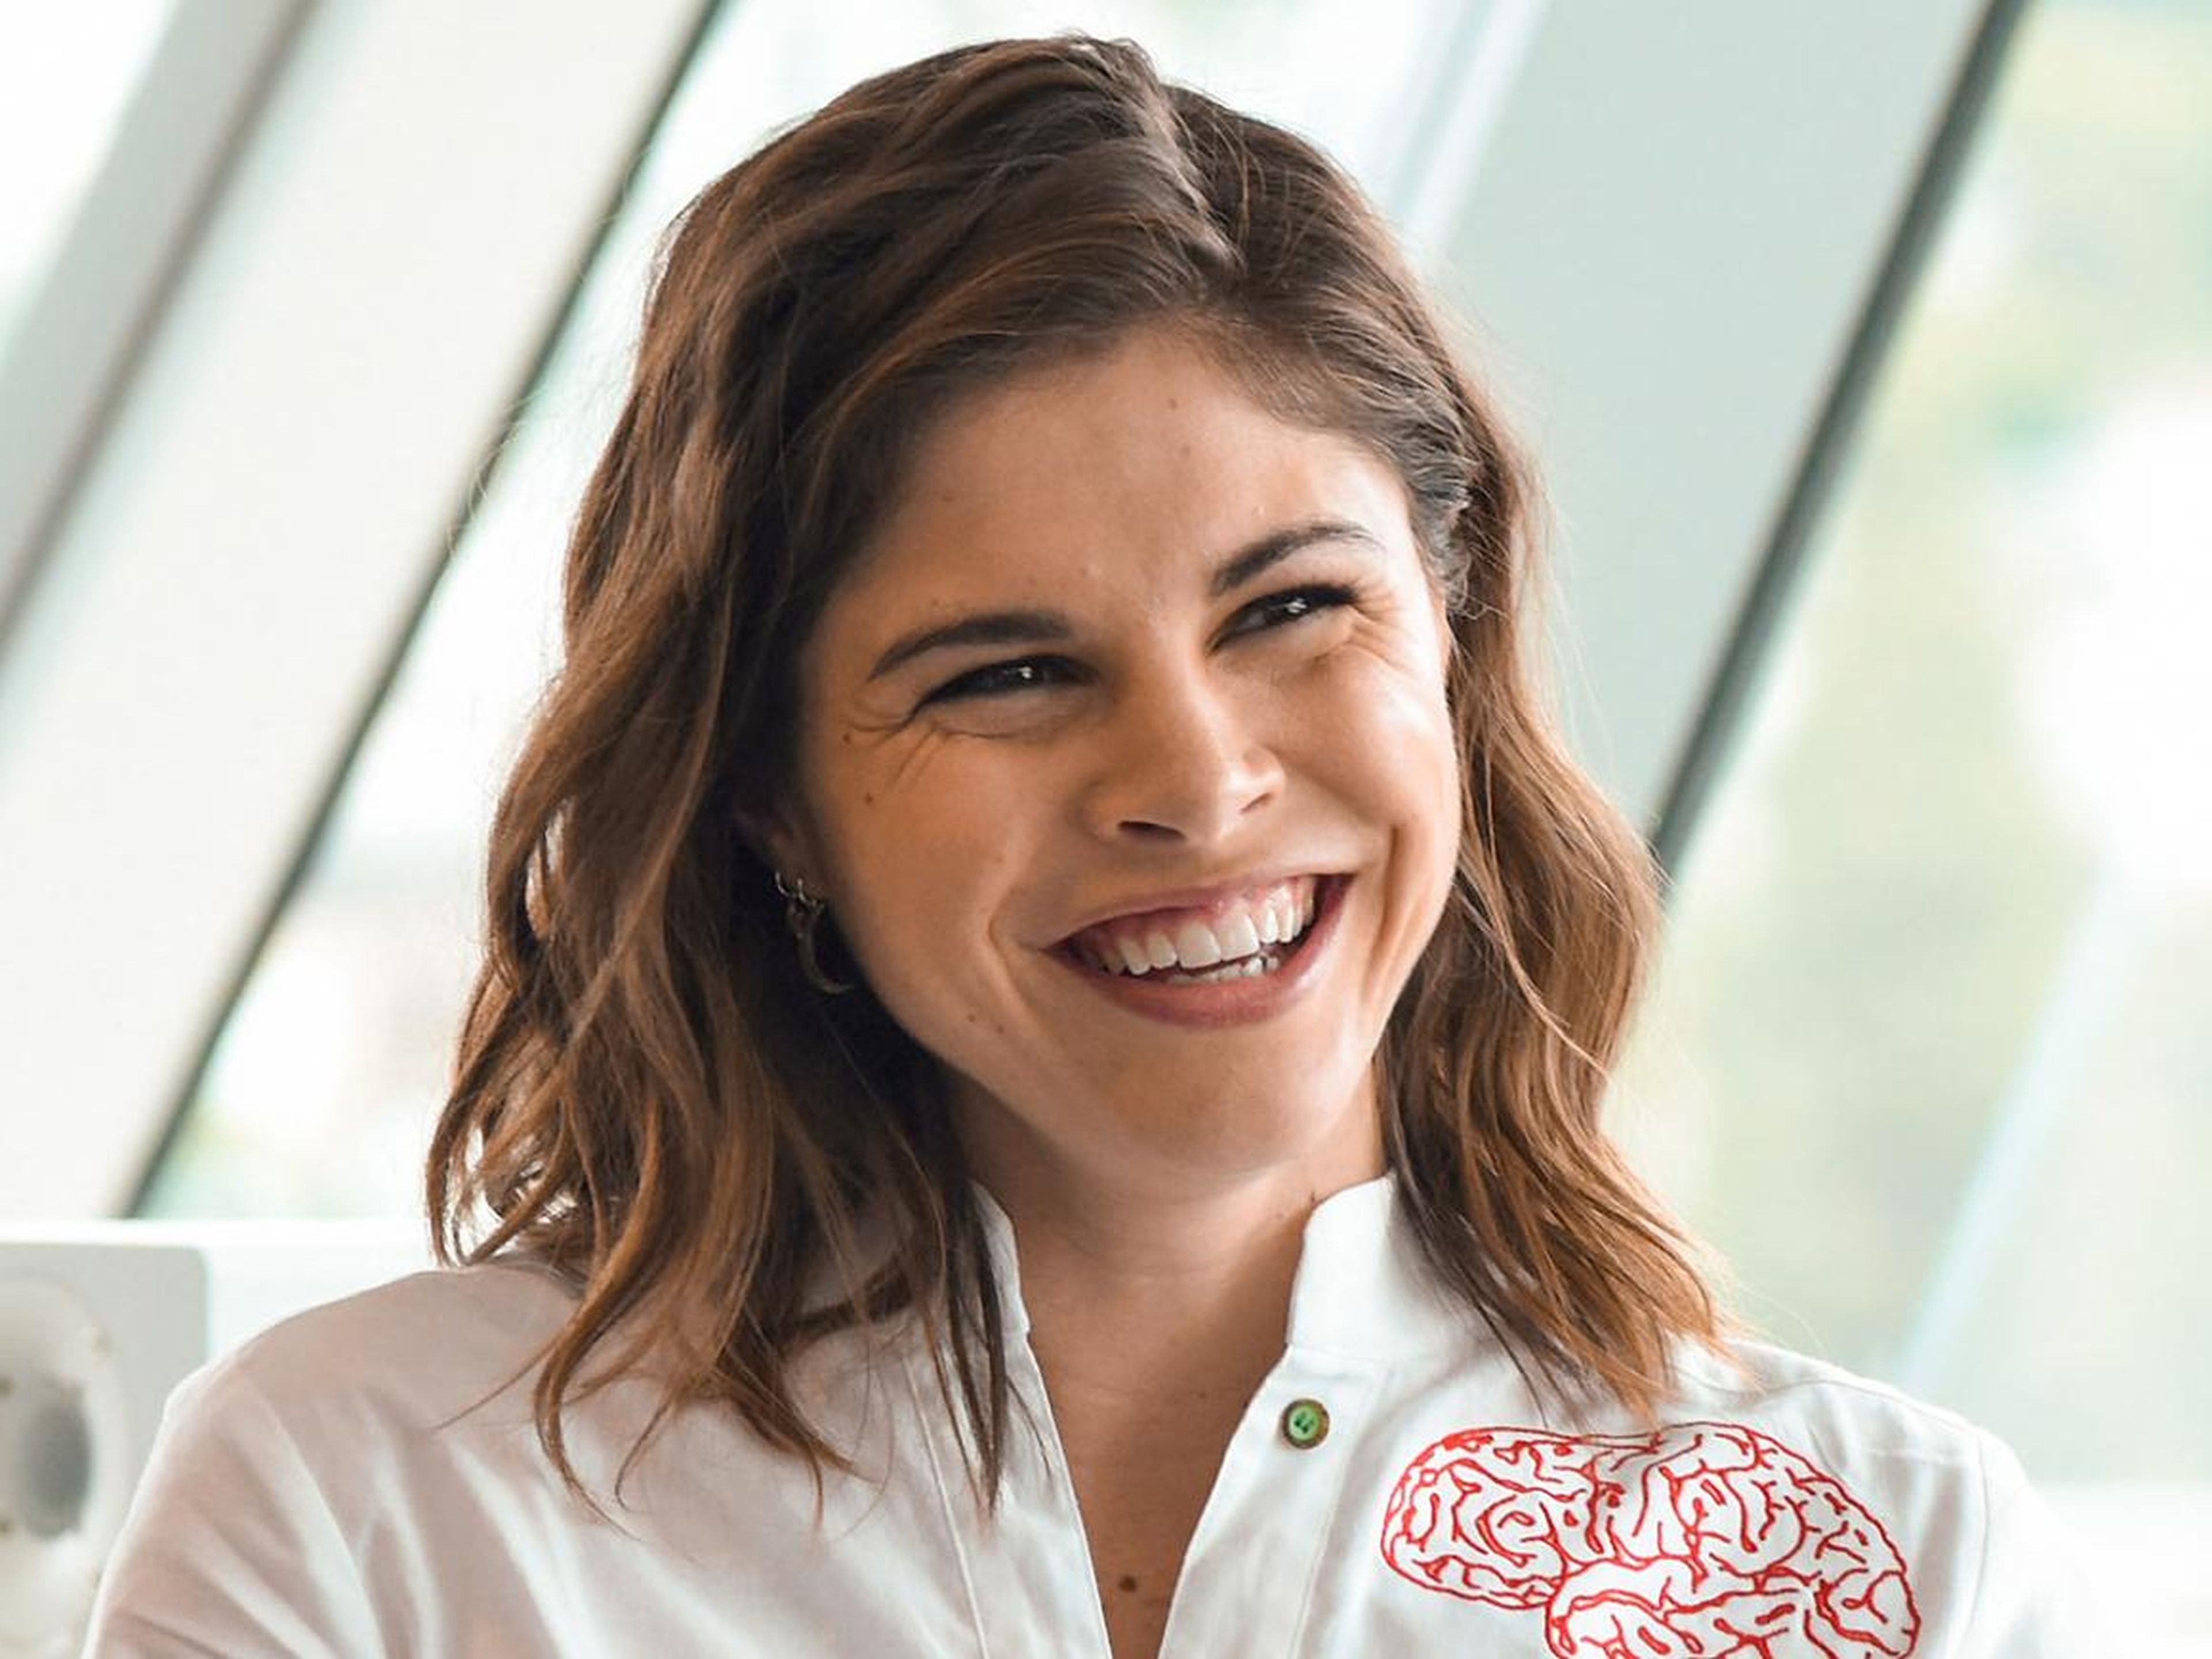 Emily Weiss, the founder of Glossier, is upending the beauty industry